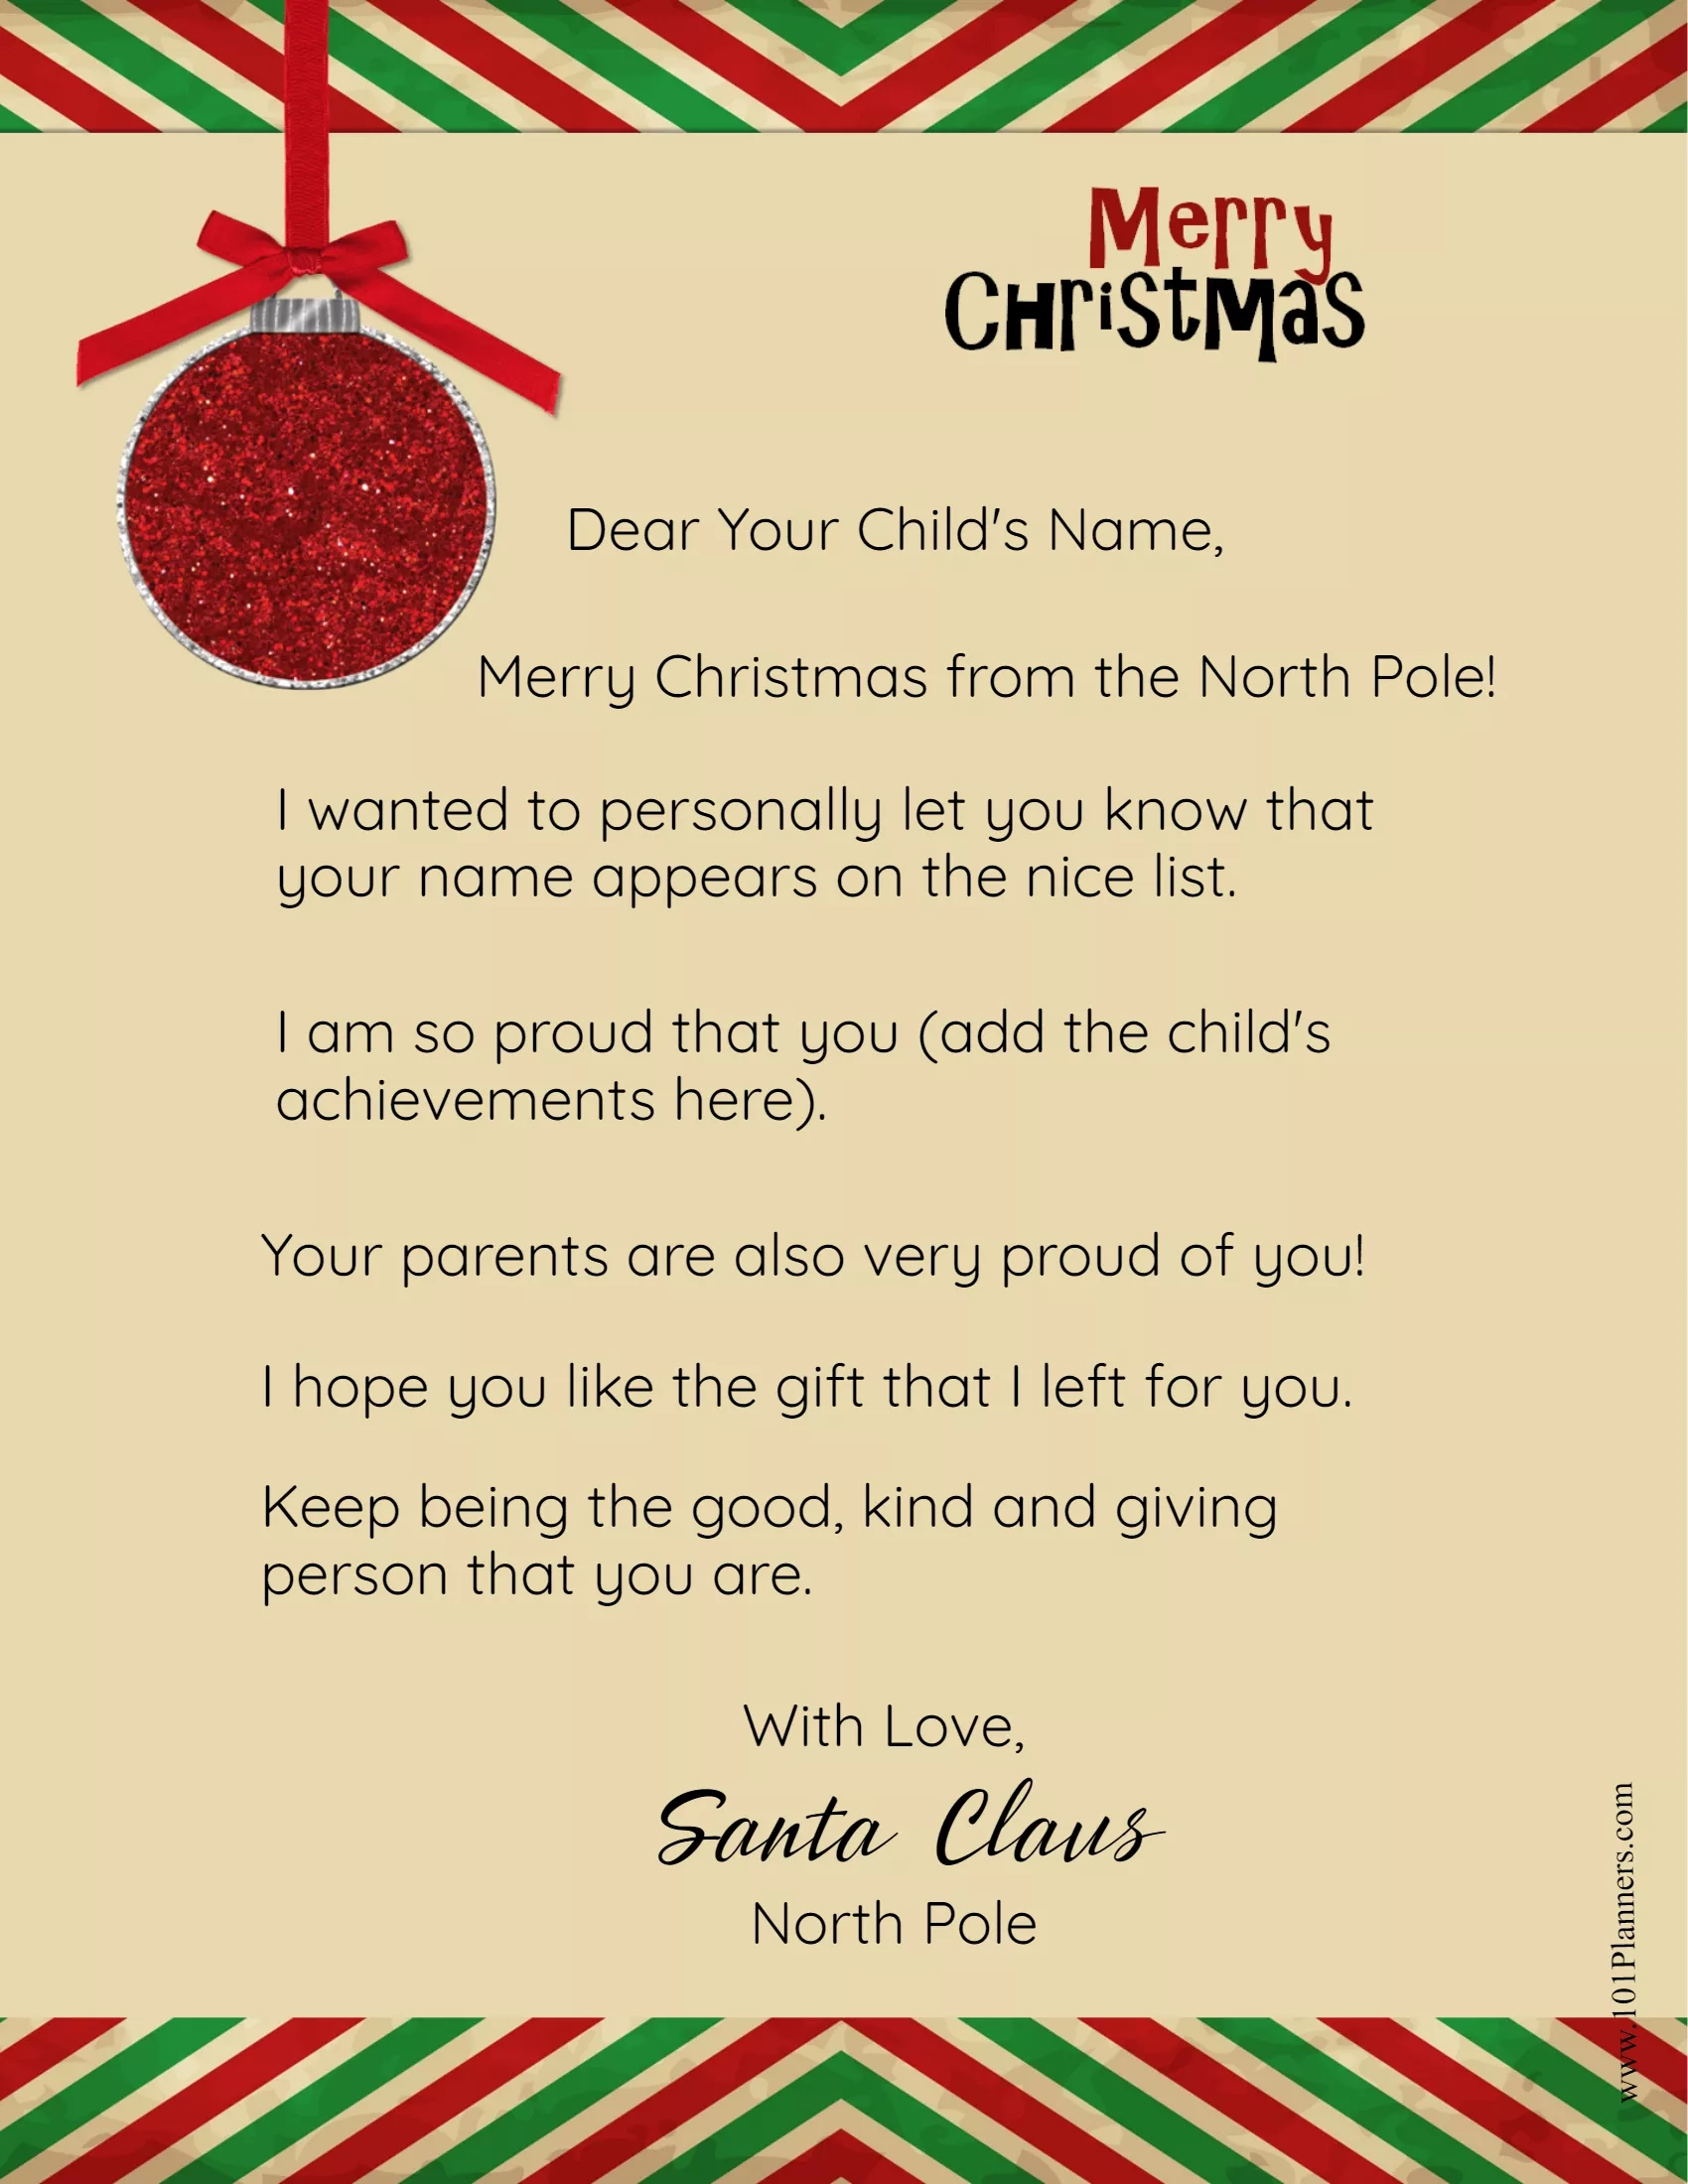 Free Personalized Printable Letter From Santa To Your Child - Free Printable And Editable Letters From Santa